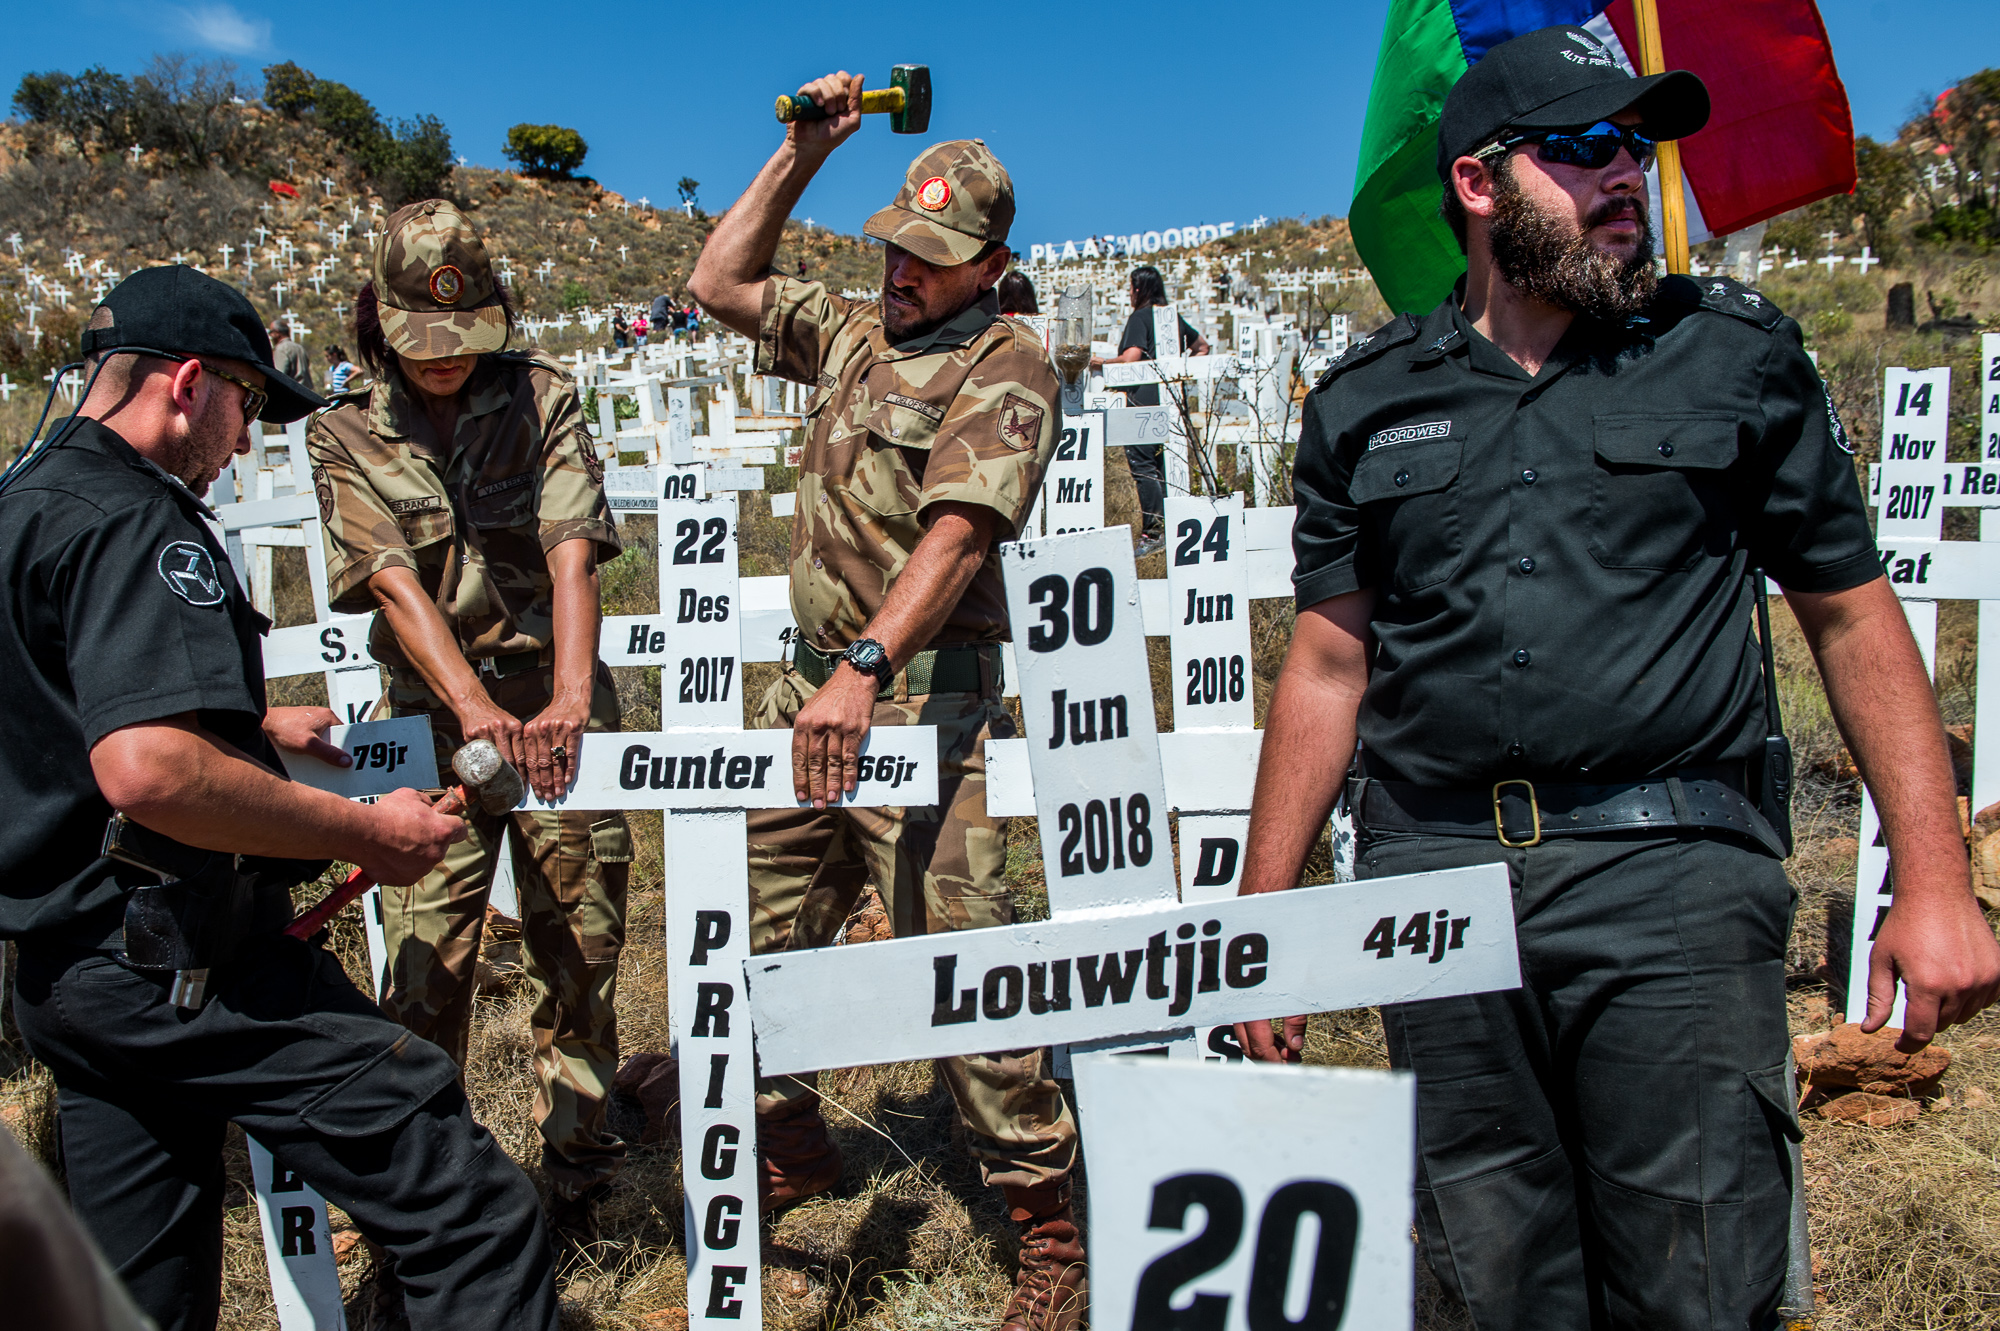  South Africa, Ysterberg, 01.09.2018 // Members of the Afrikaner Weerstandsbeweging place crosses for murdered white farmers in South Africa. Right-winged Afrikaners believe South Africa is on the brink or already in the process of a genocide against